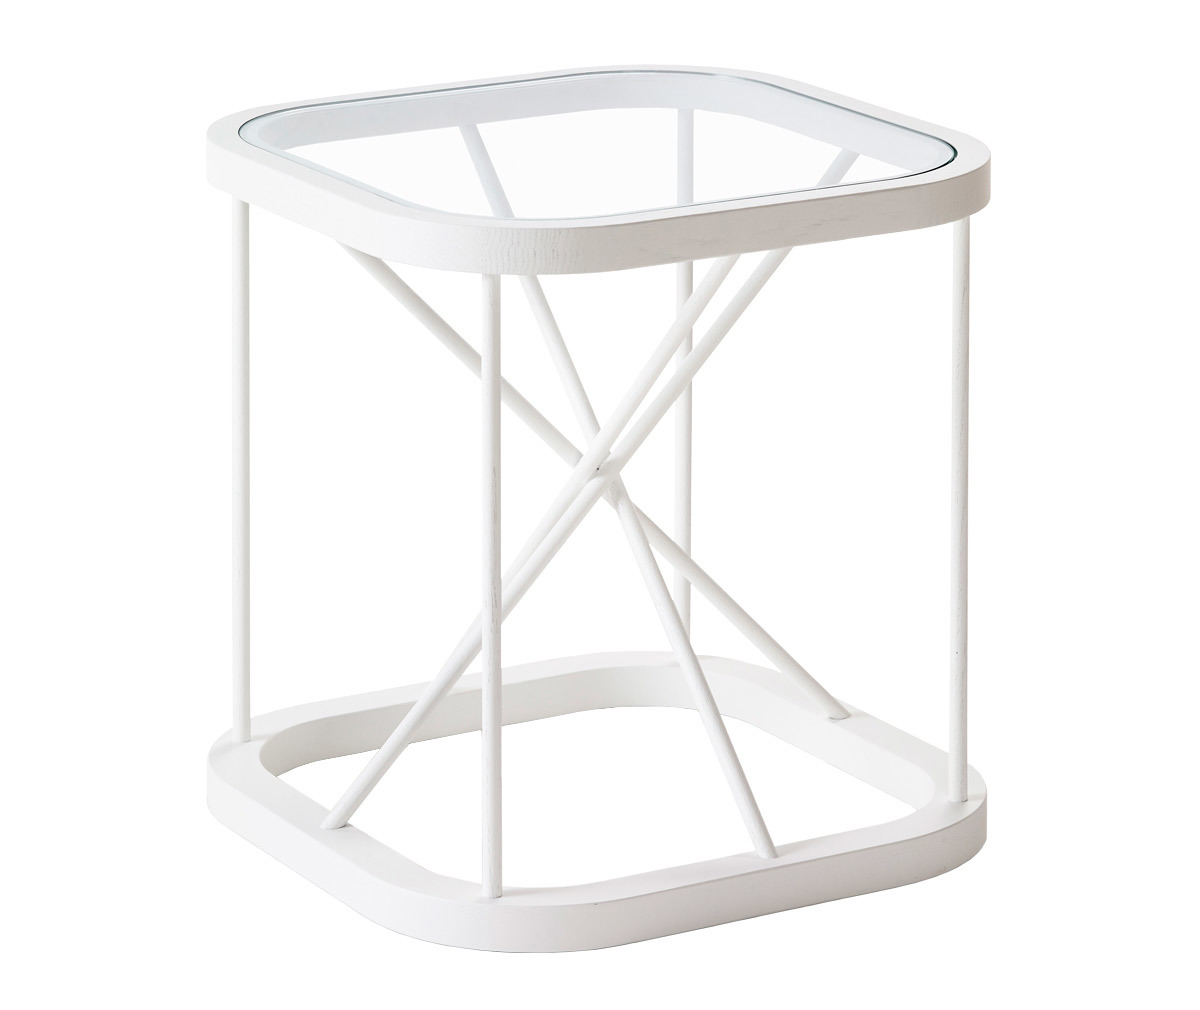 Woodnotes Twiggy Side Table White, 44 x 44 cm